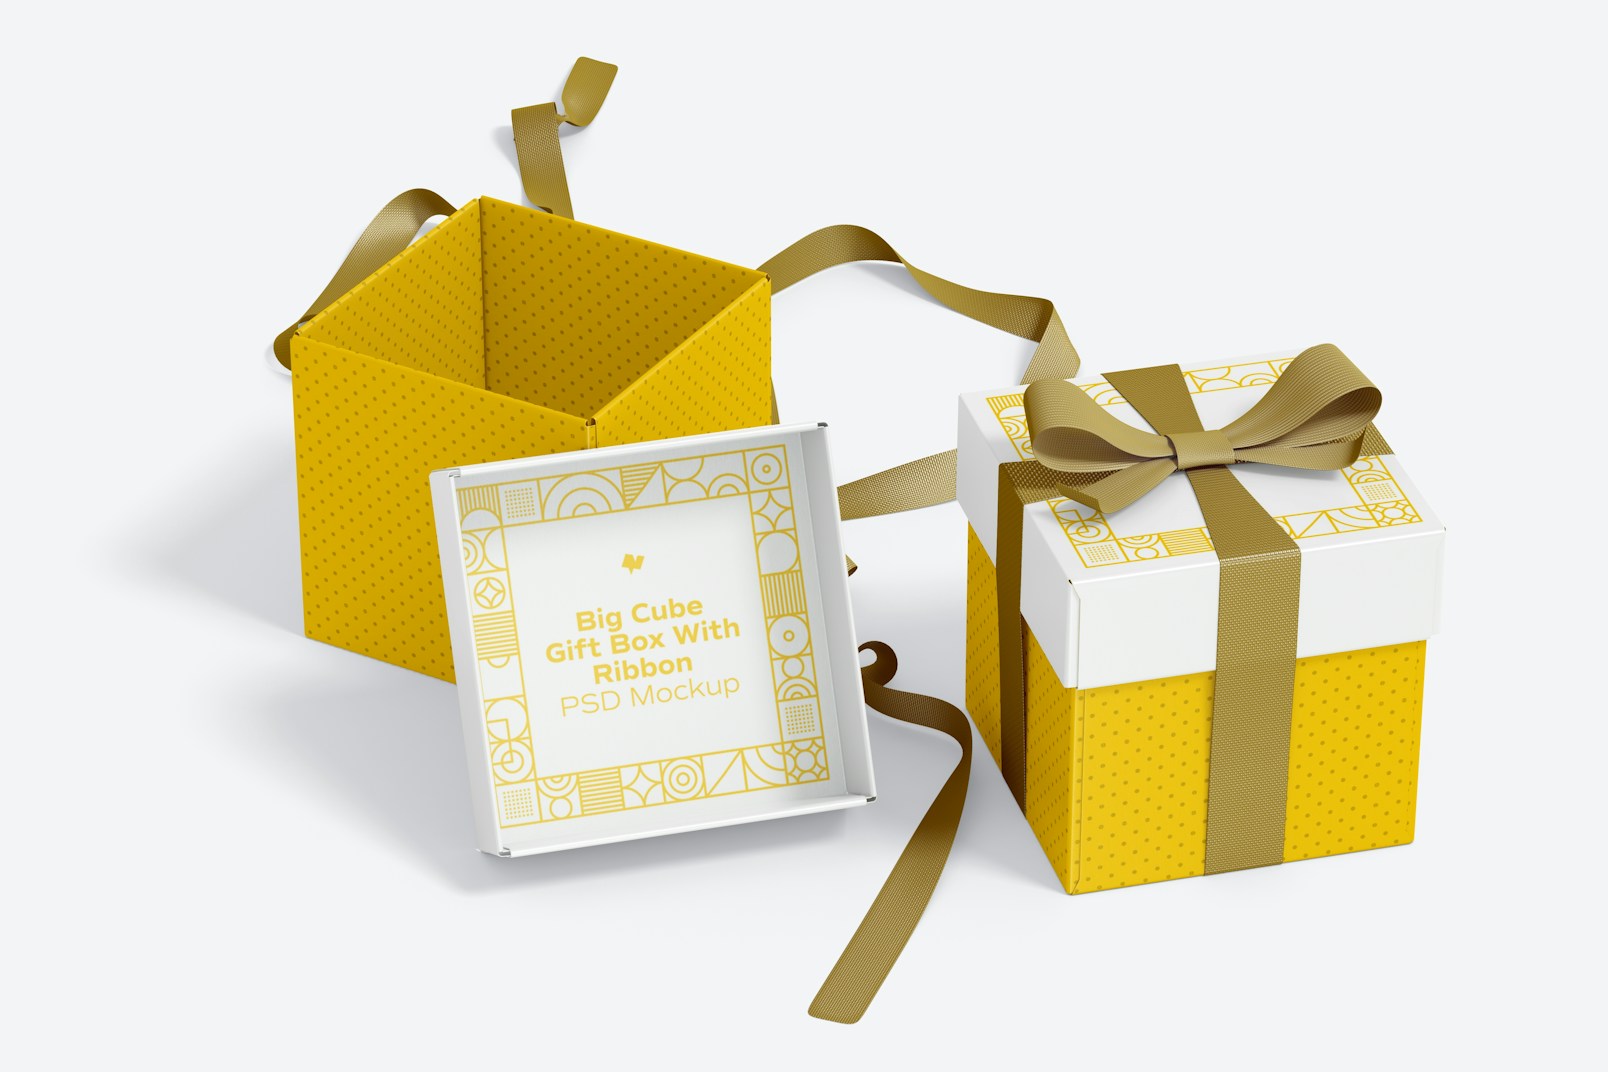 Big Cube Gift Boxes With Ribbon Mockup, Perspective View